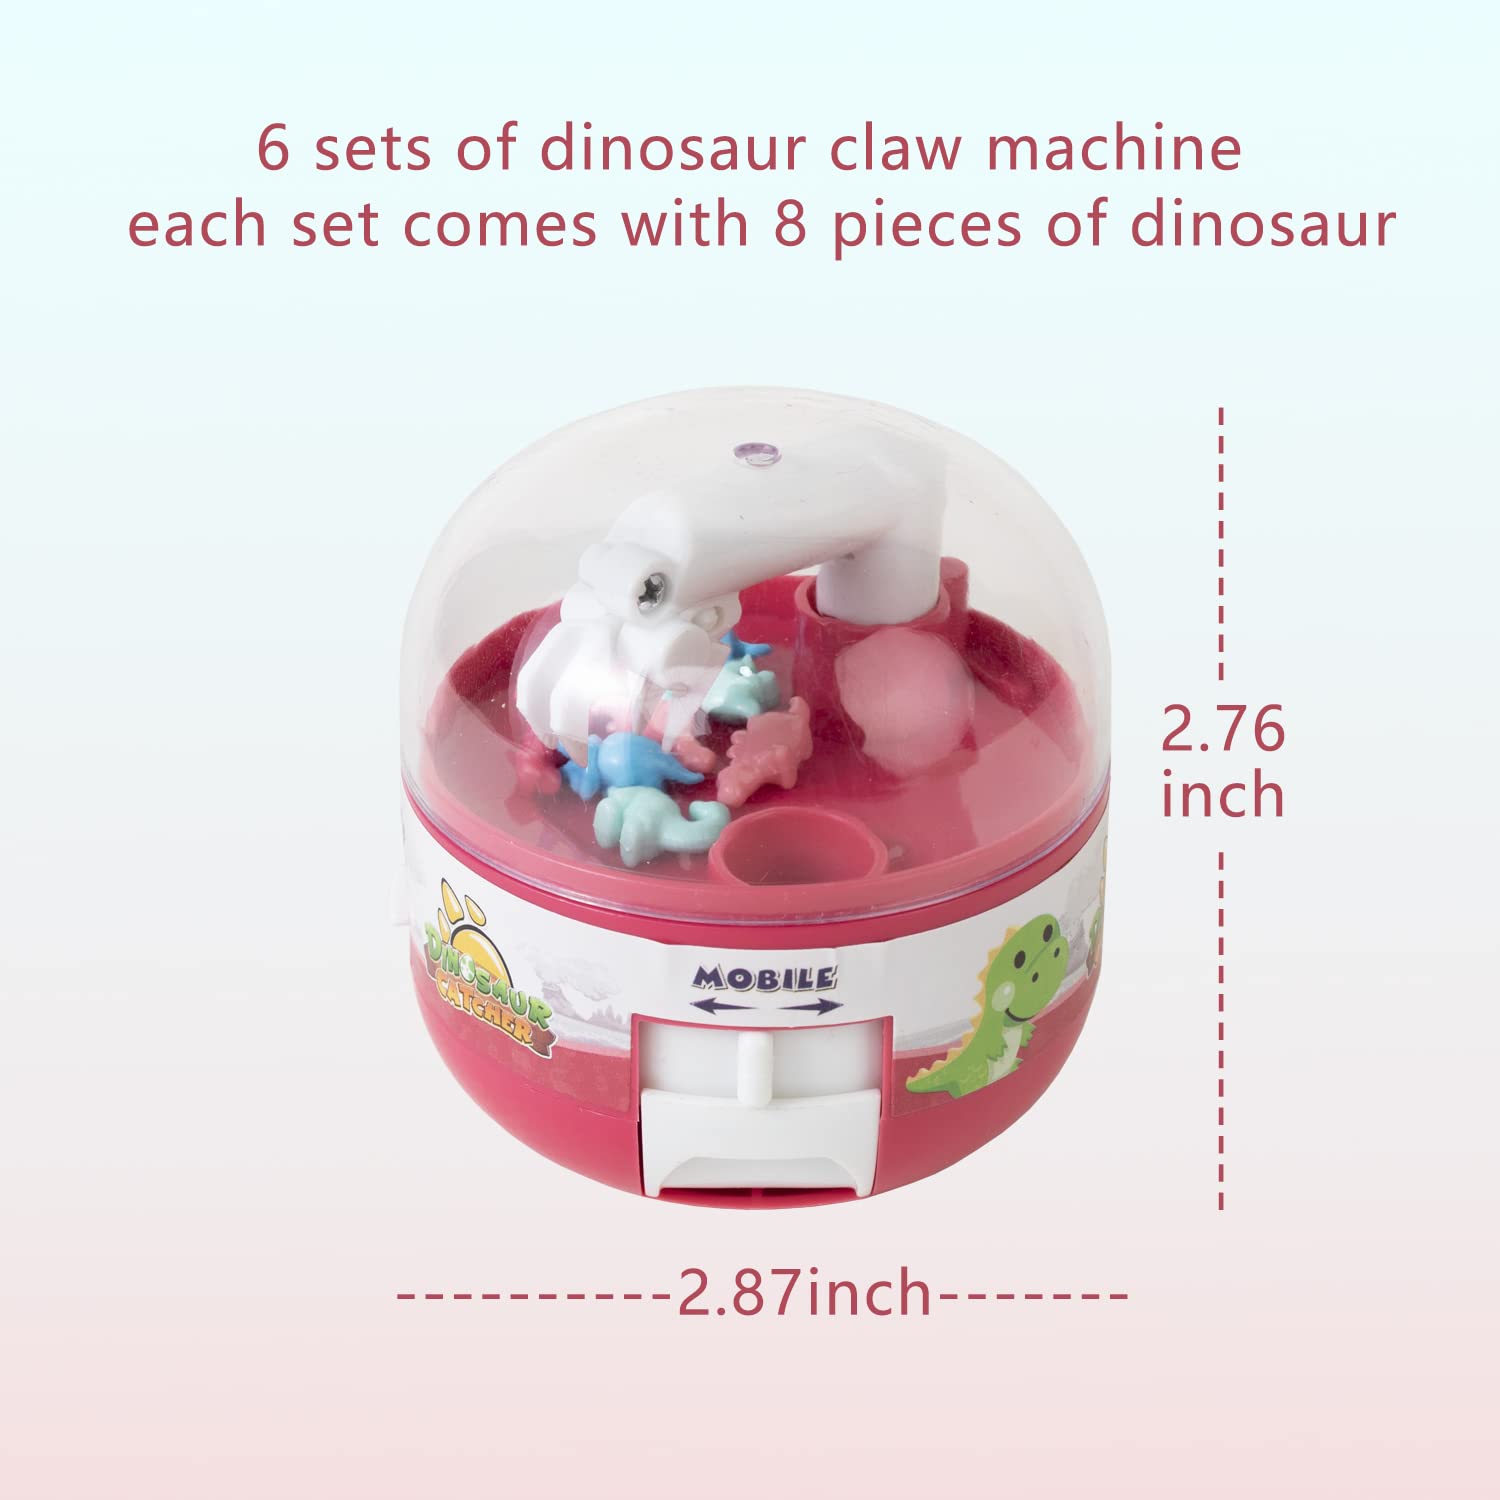 4 Pcs Mini Claw Machines ,Mini Dinosaur Claw Machine Toy Fingertip Toys Cute Things for Pinata Stuffers Party Favors for Classroom Prizes Birthday Gifts for 3 4 5 6 7 8 Years Old Boys and Girls